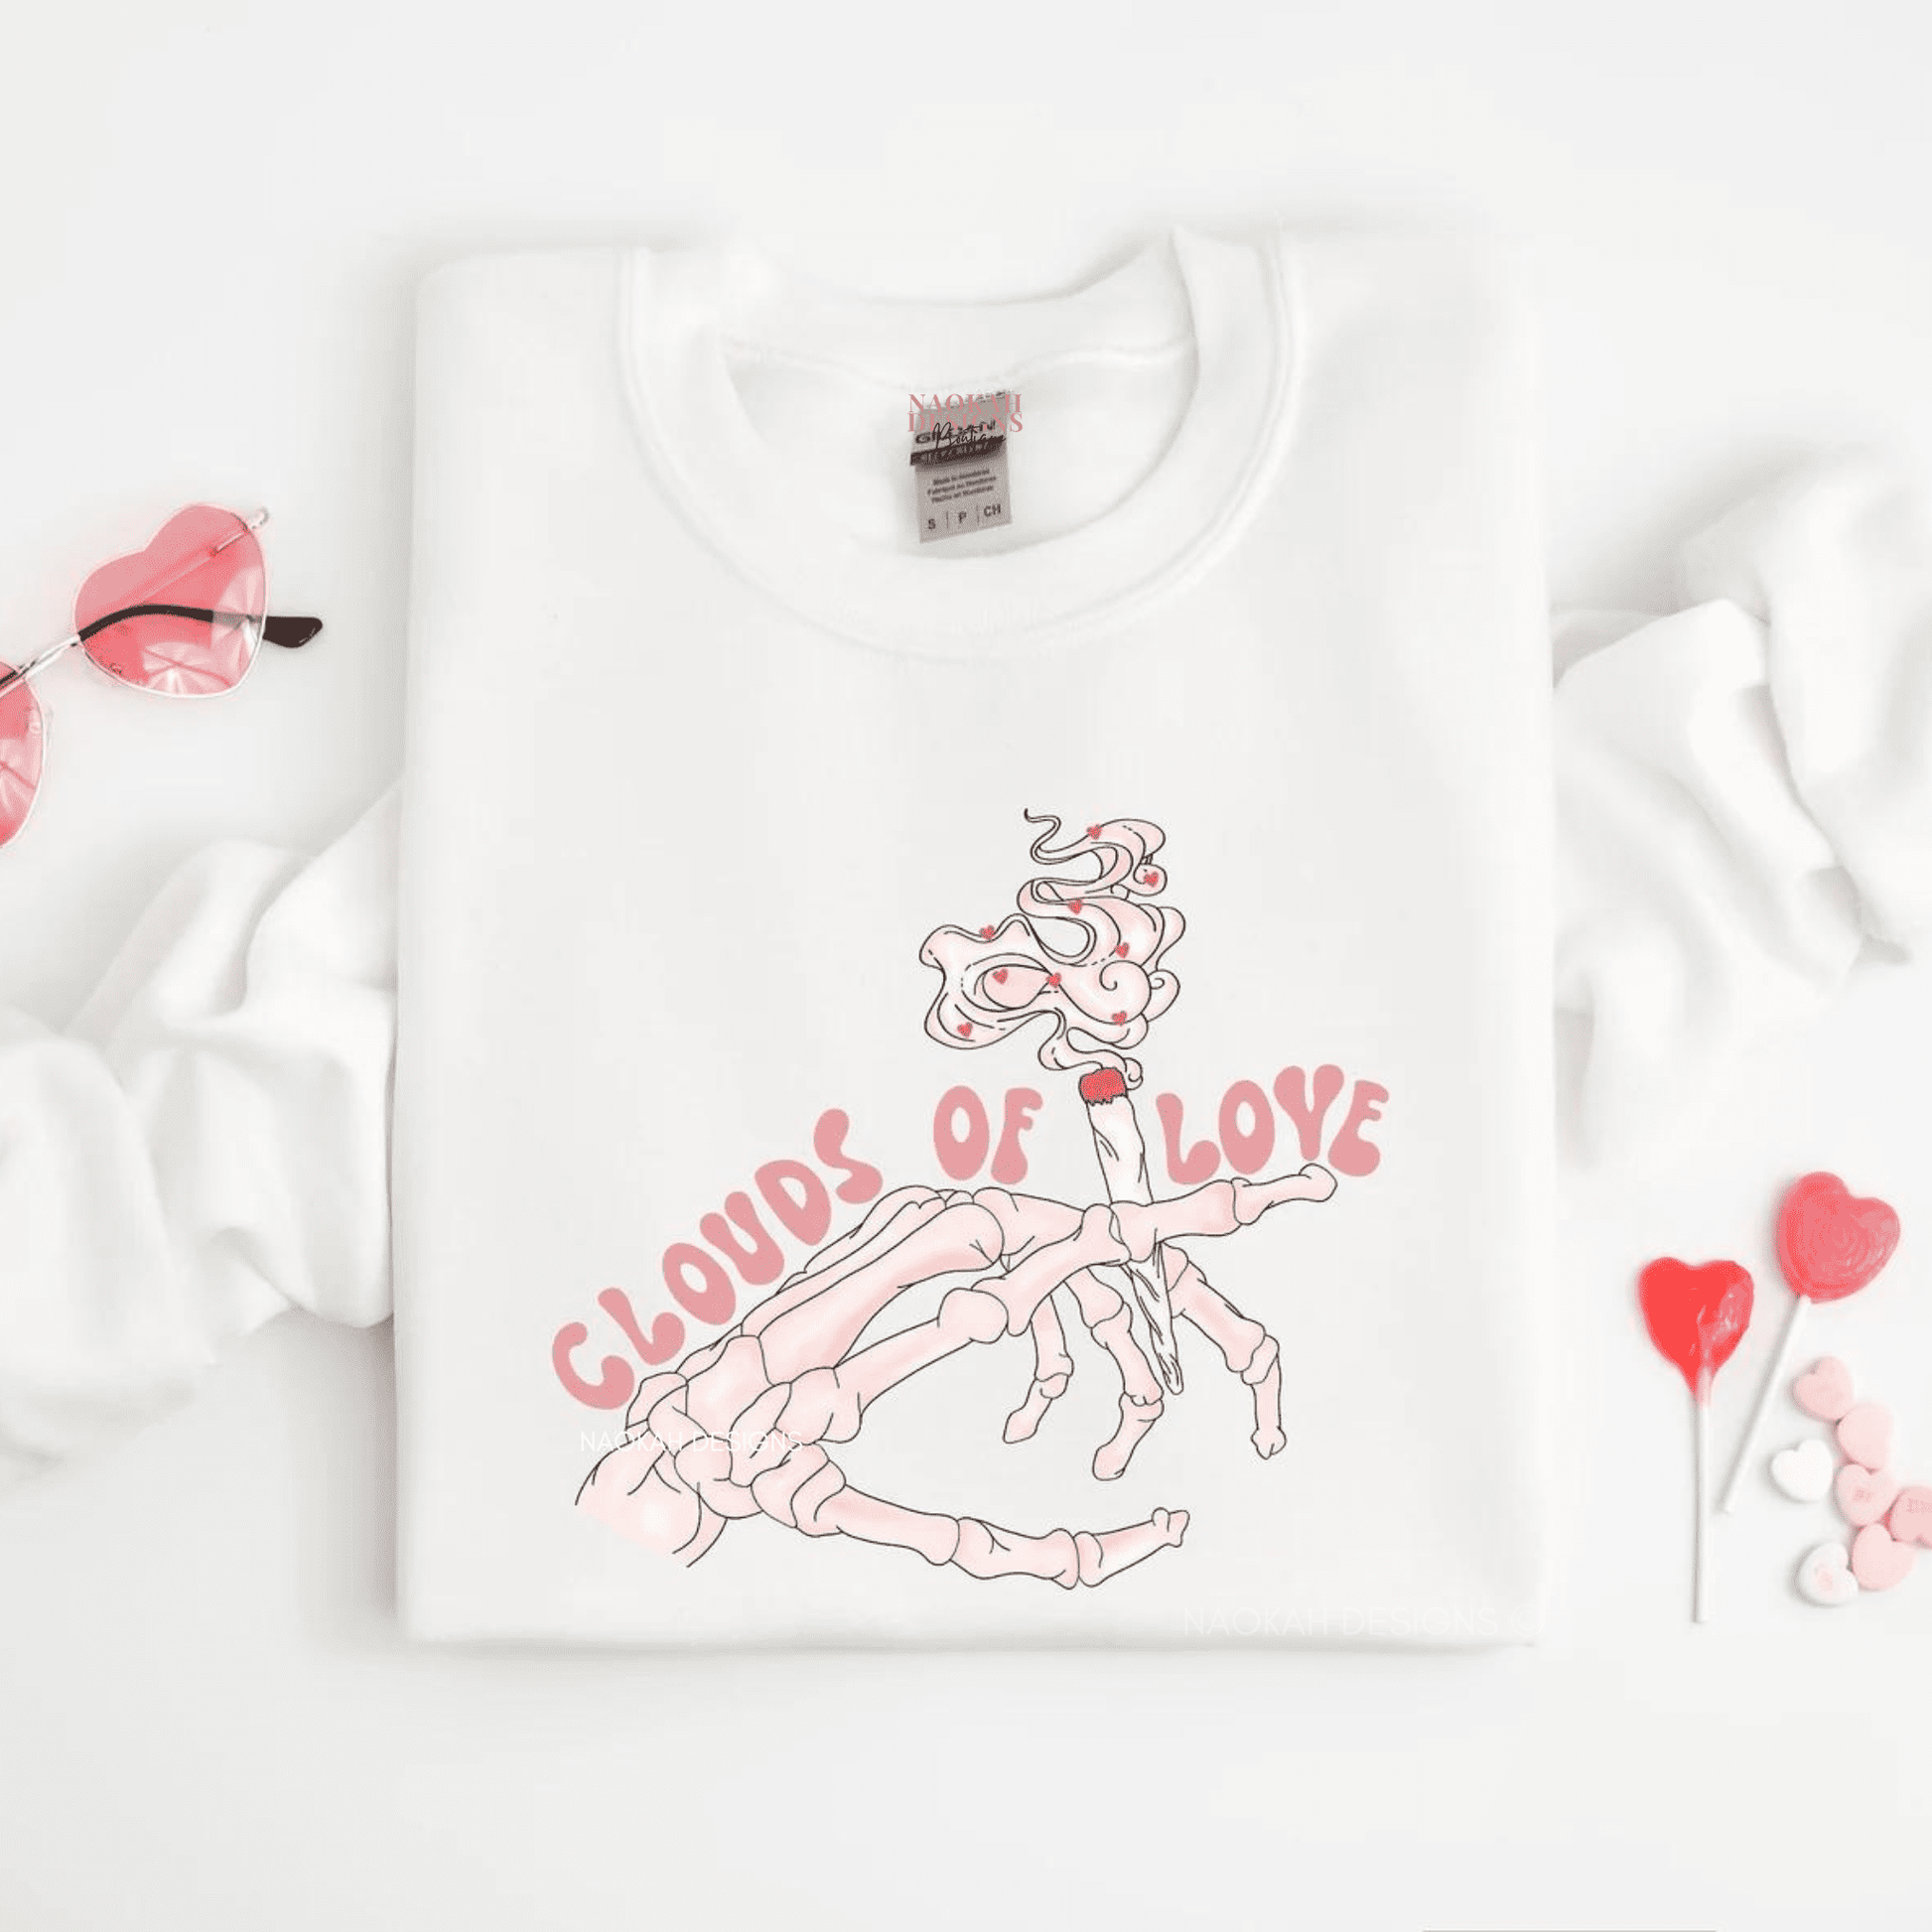 Clouds Of Love Sweater, Skeleton Hands Valentine Shirt, Valentines Day Shirt, Be Mine Shirt, XOXO Tshirt, Lovely Valentines Day, marijuana shirt, toker shirt, weed lover shirt, weed valentine shirt, best buds shirt, rolling joint shirt, rolling into Christmas shirt, rolling into Valentines shirt